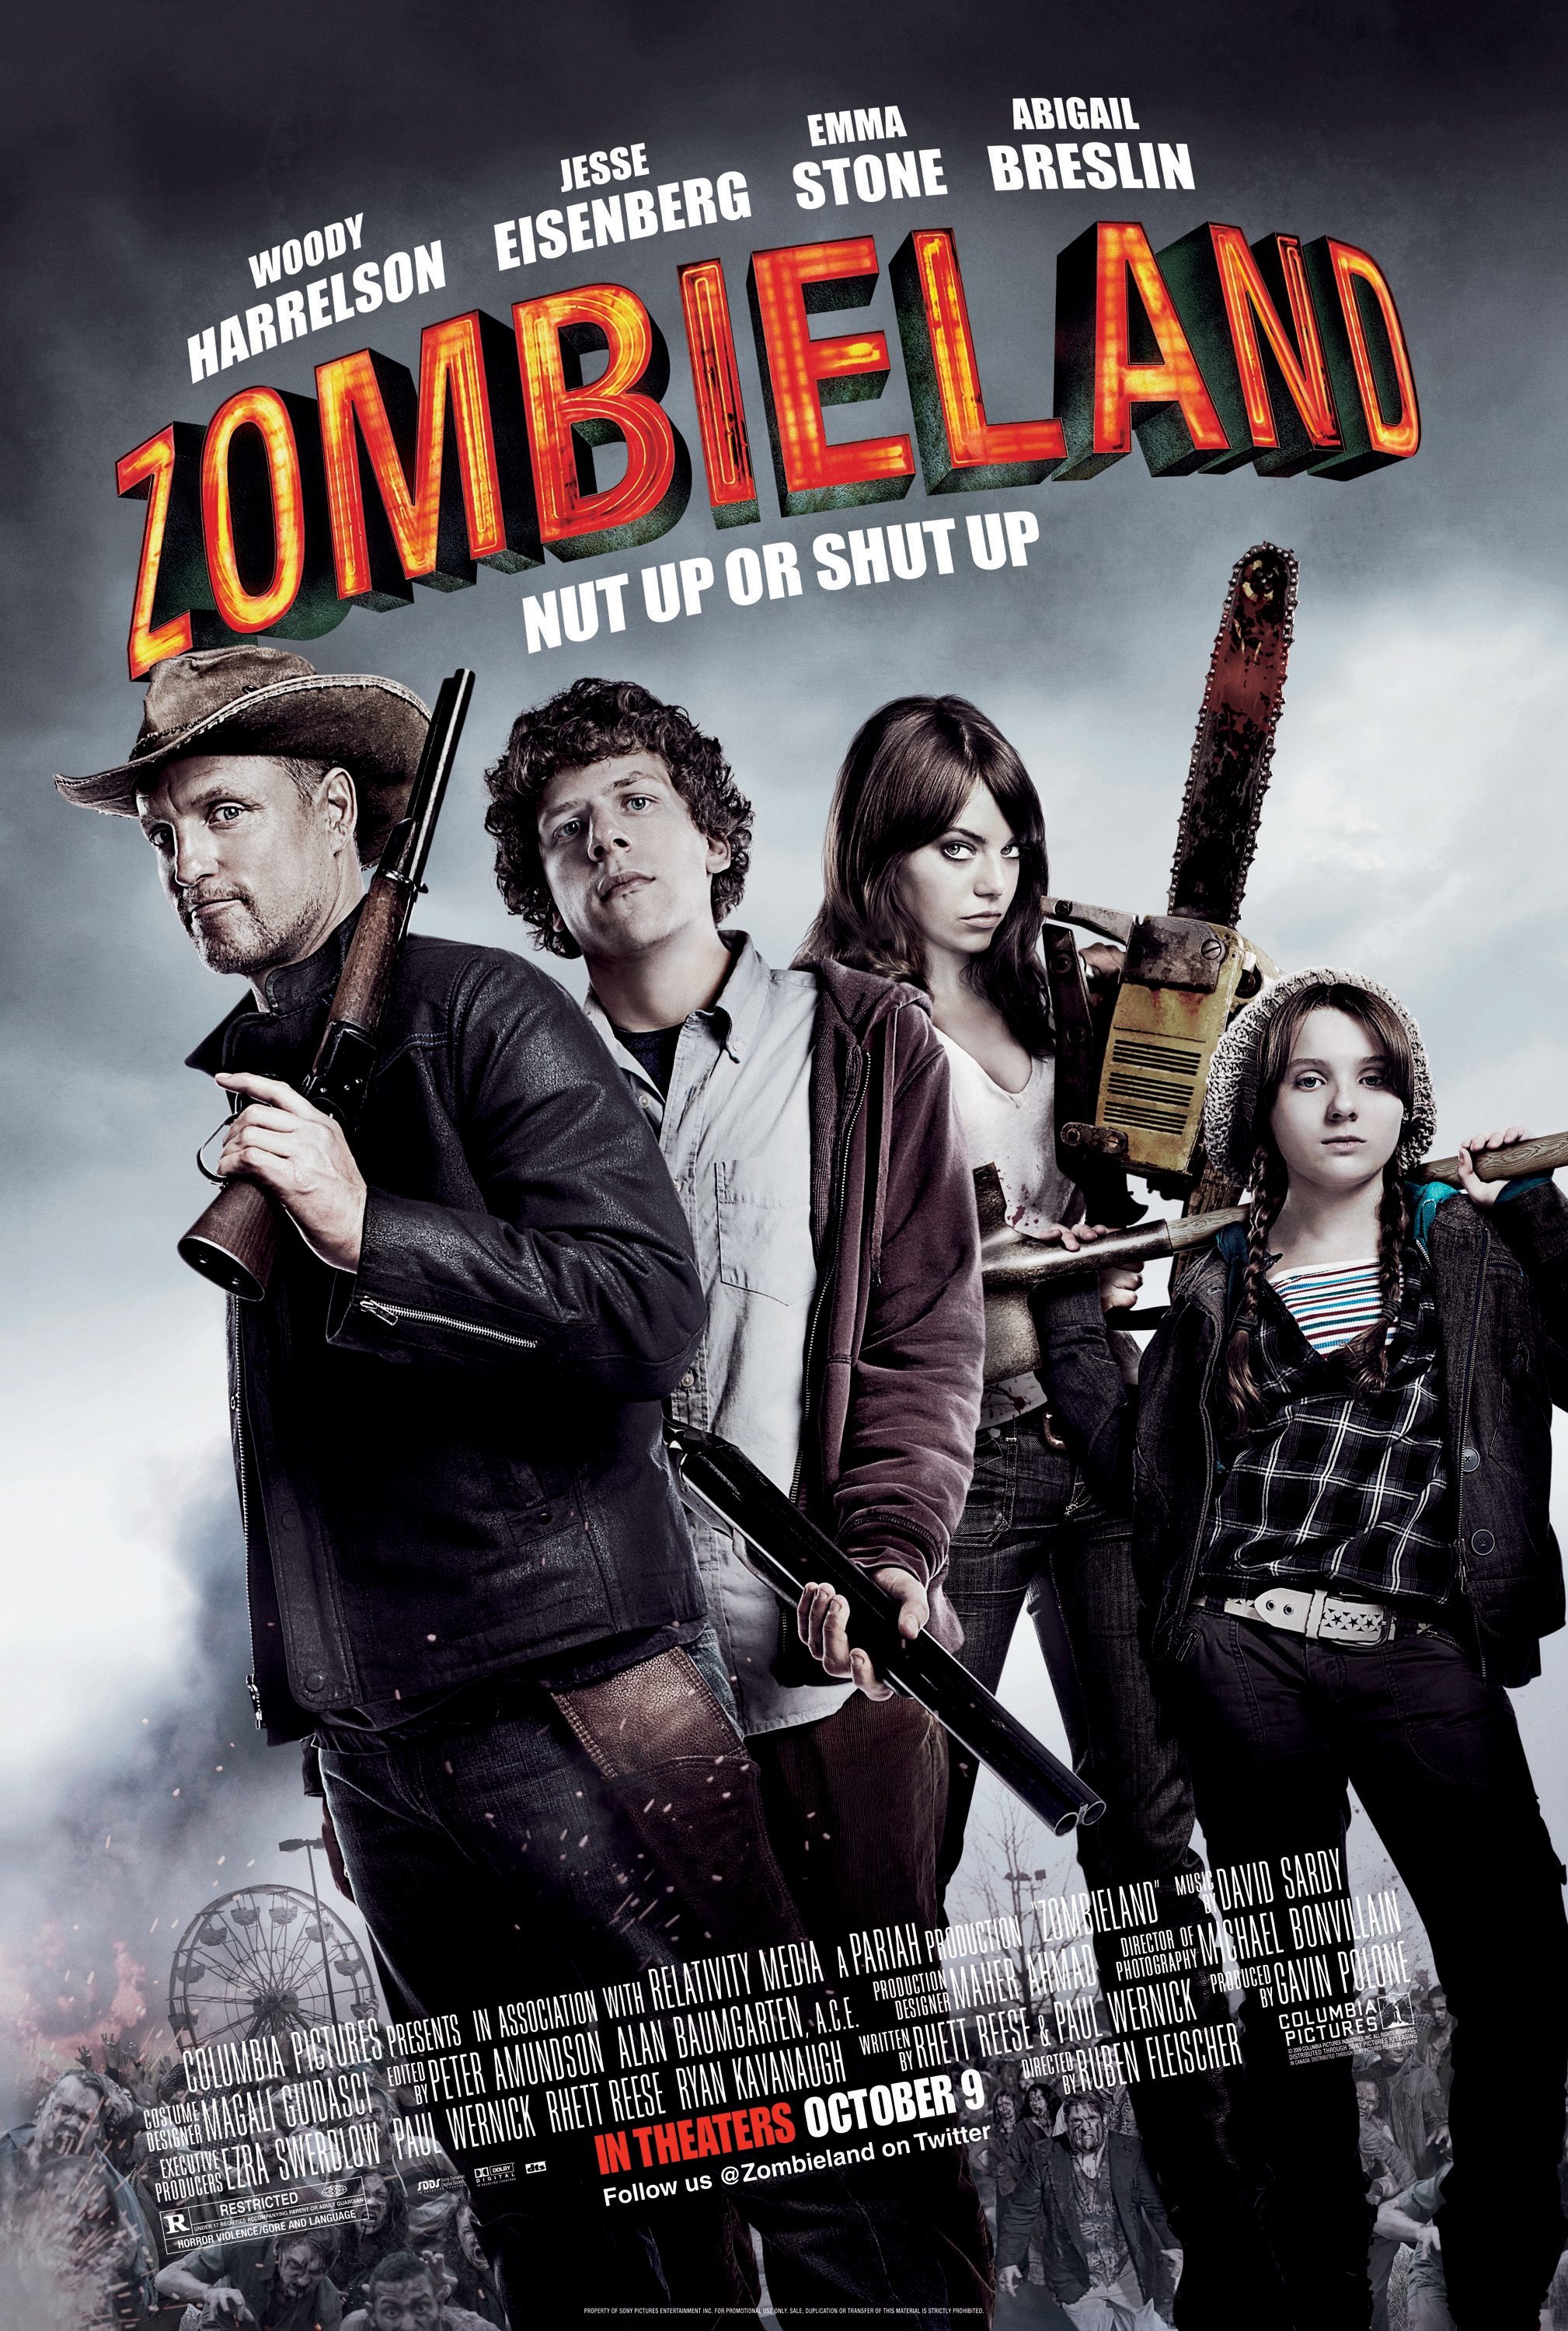 Zombieland - The New York Times